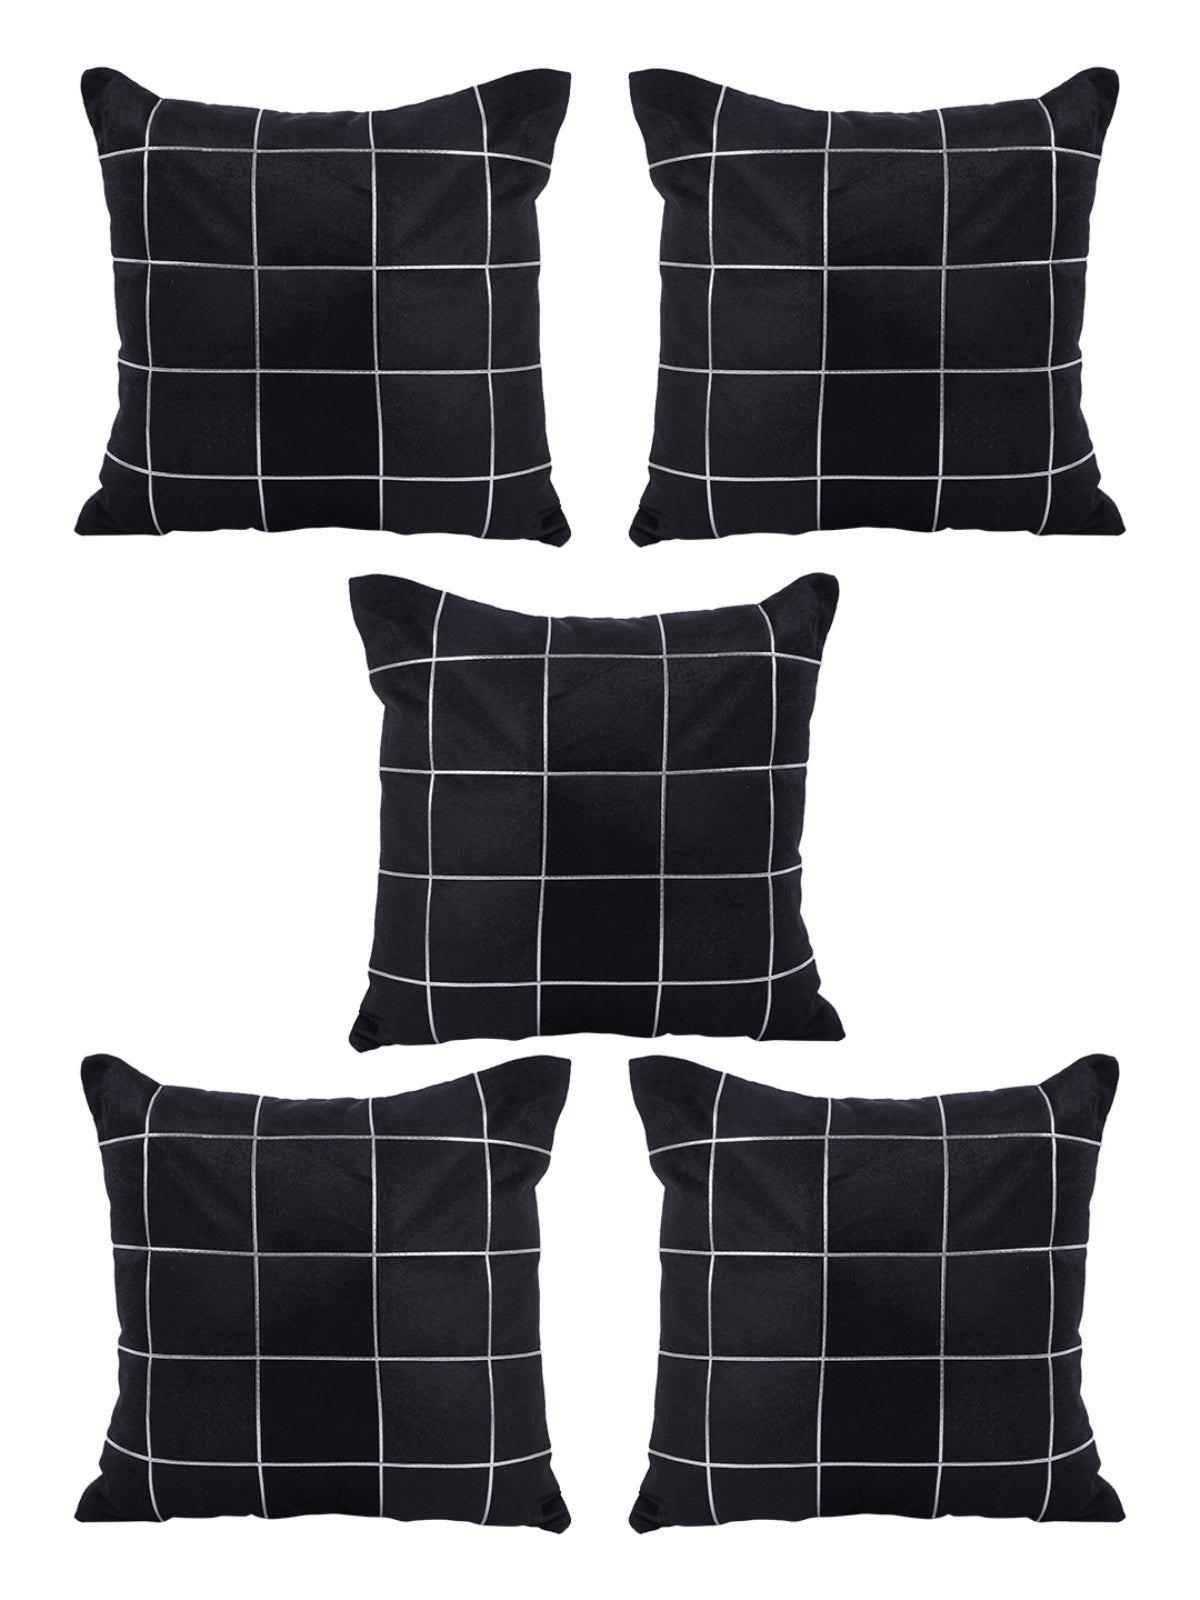 Black Set of 5 Polyester 16 Inch x 16 Inch Cushion Covers